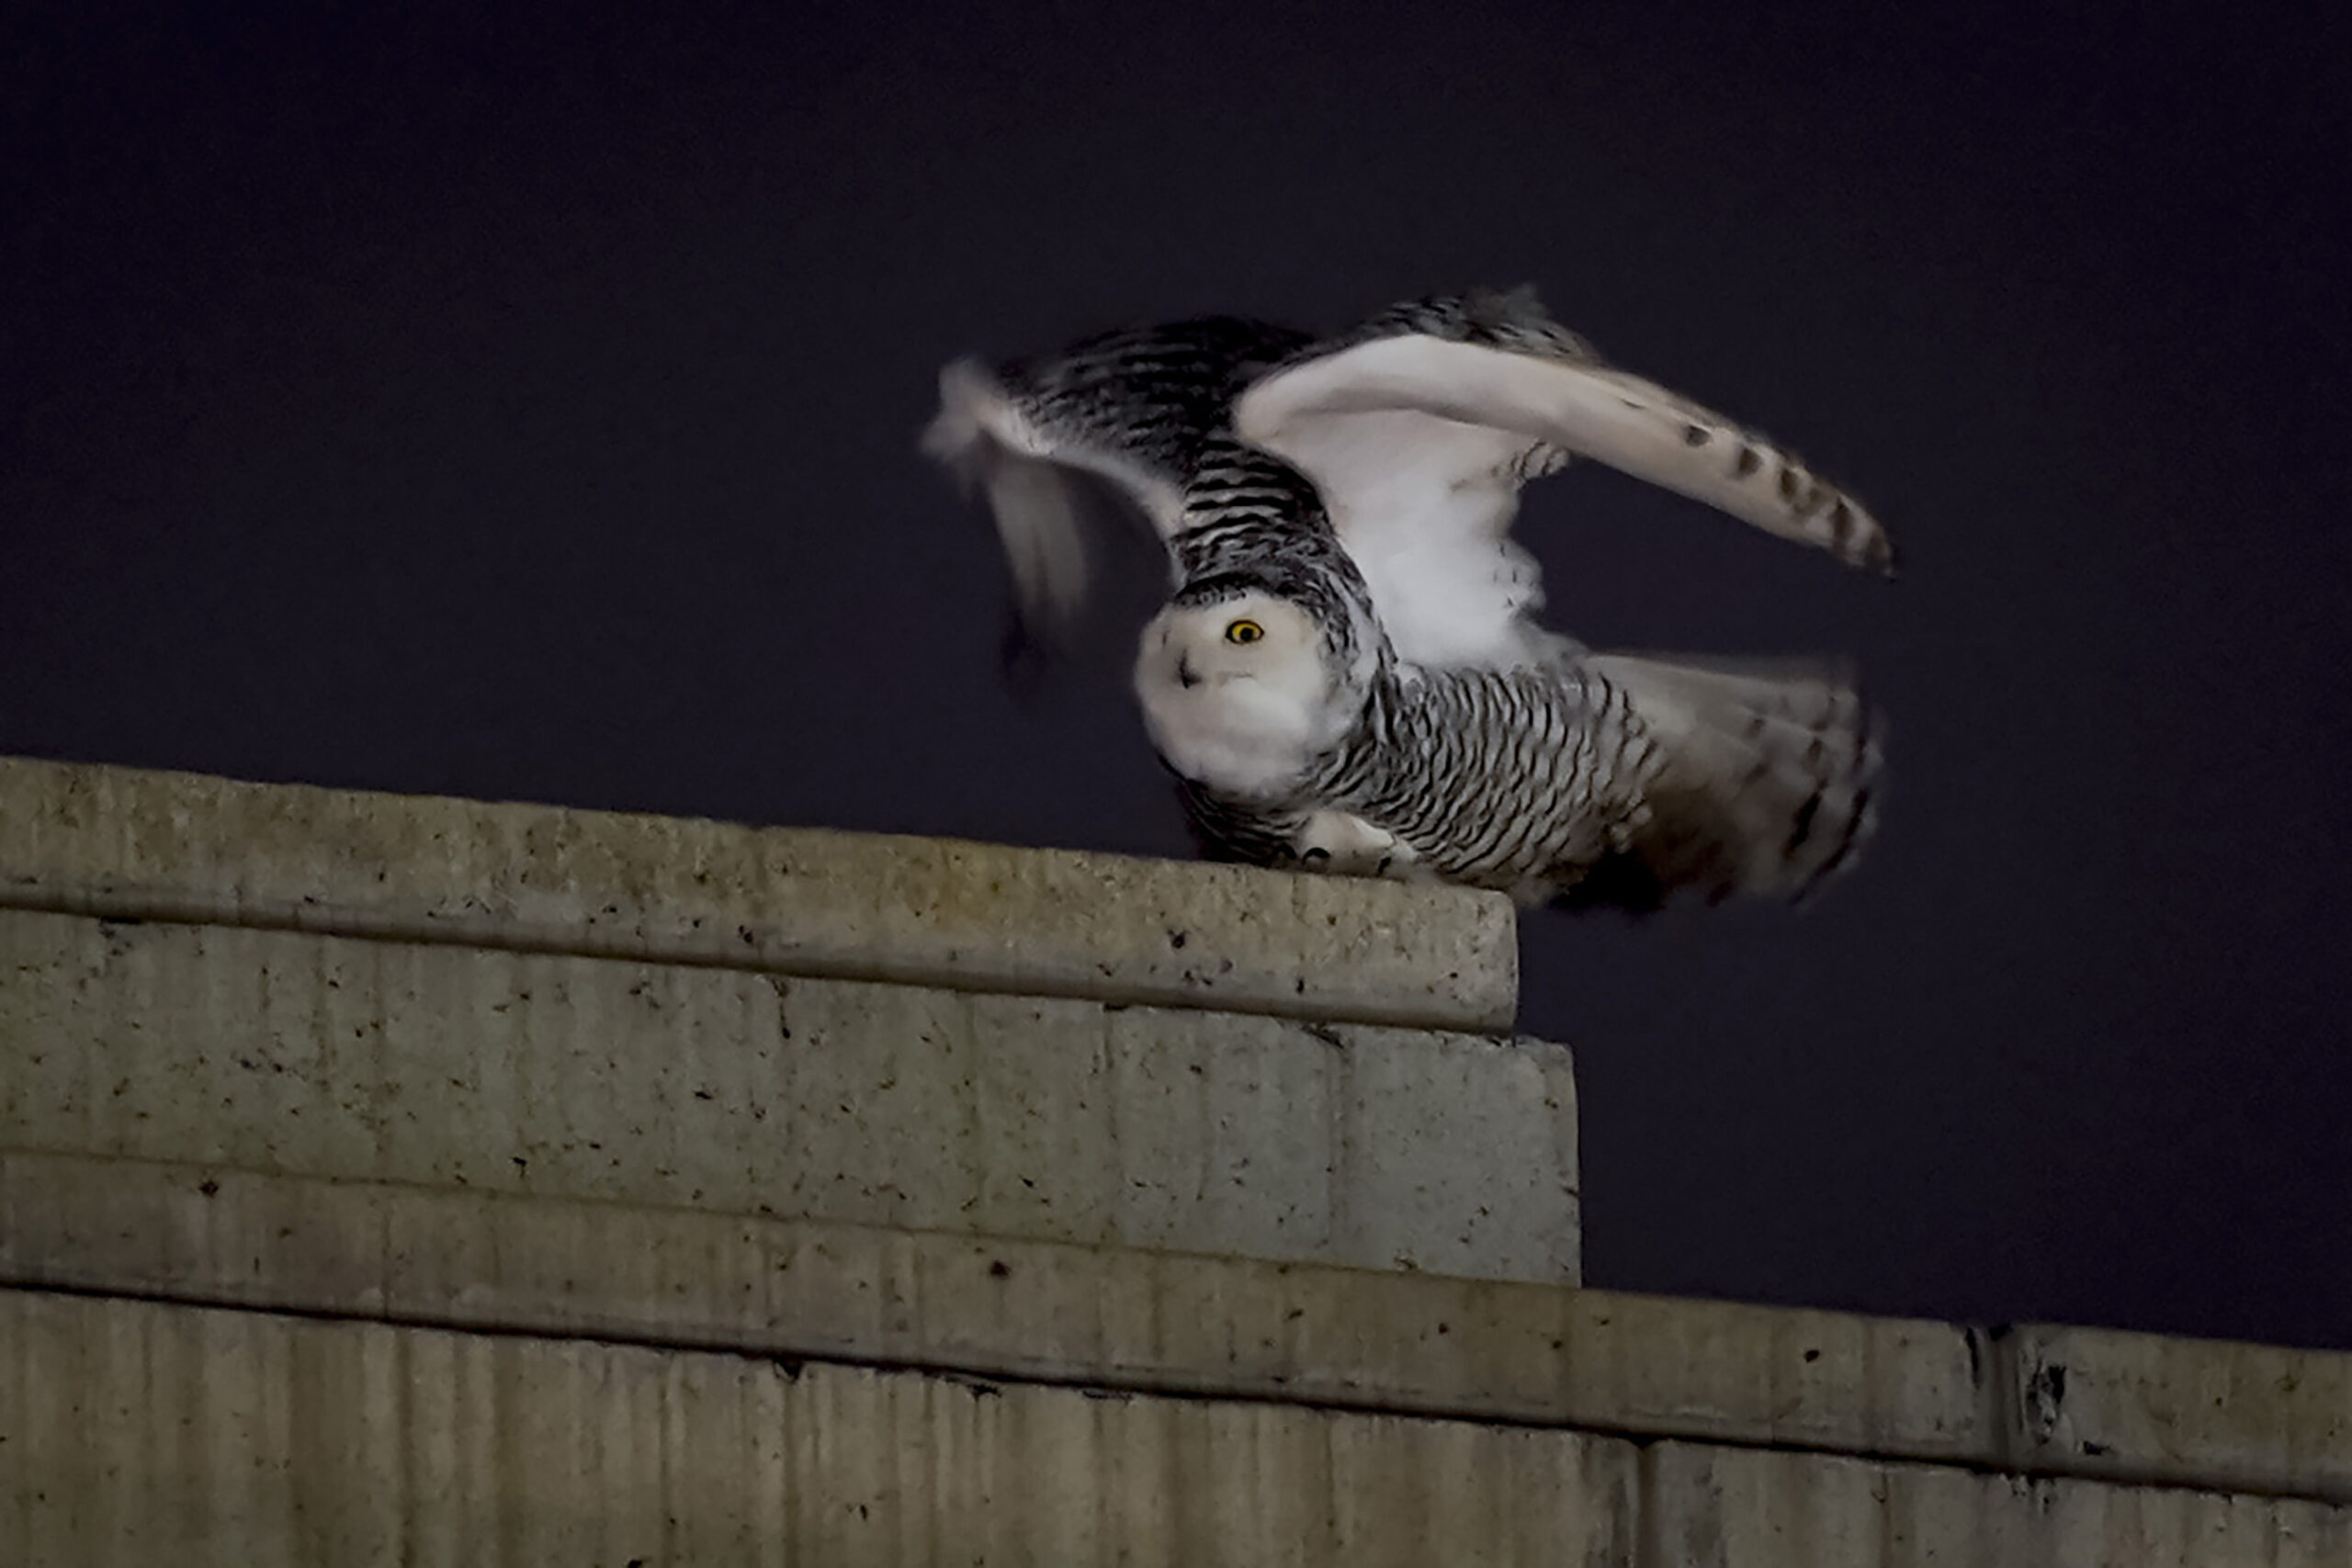 A snowy owl extending its wings while sitting on top of a building